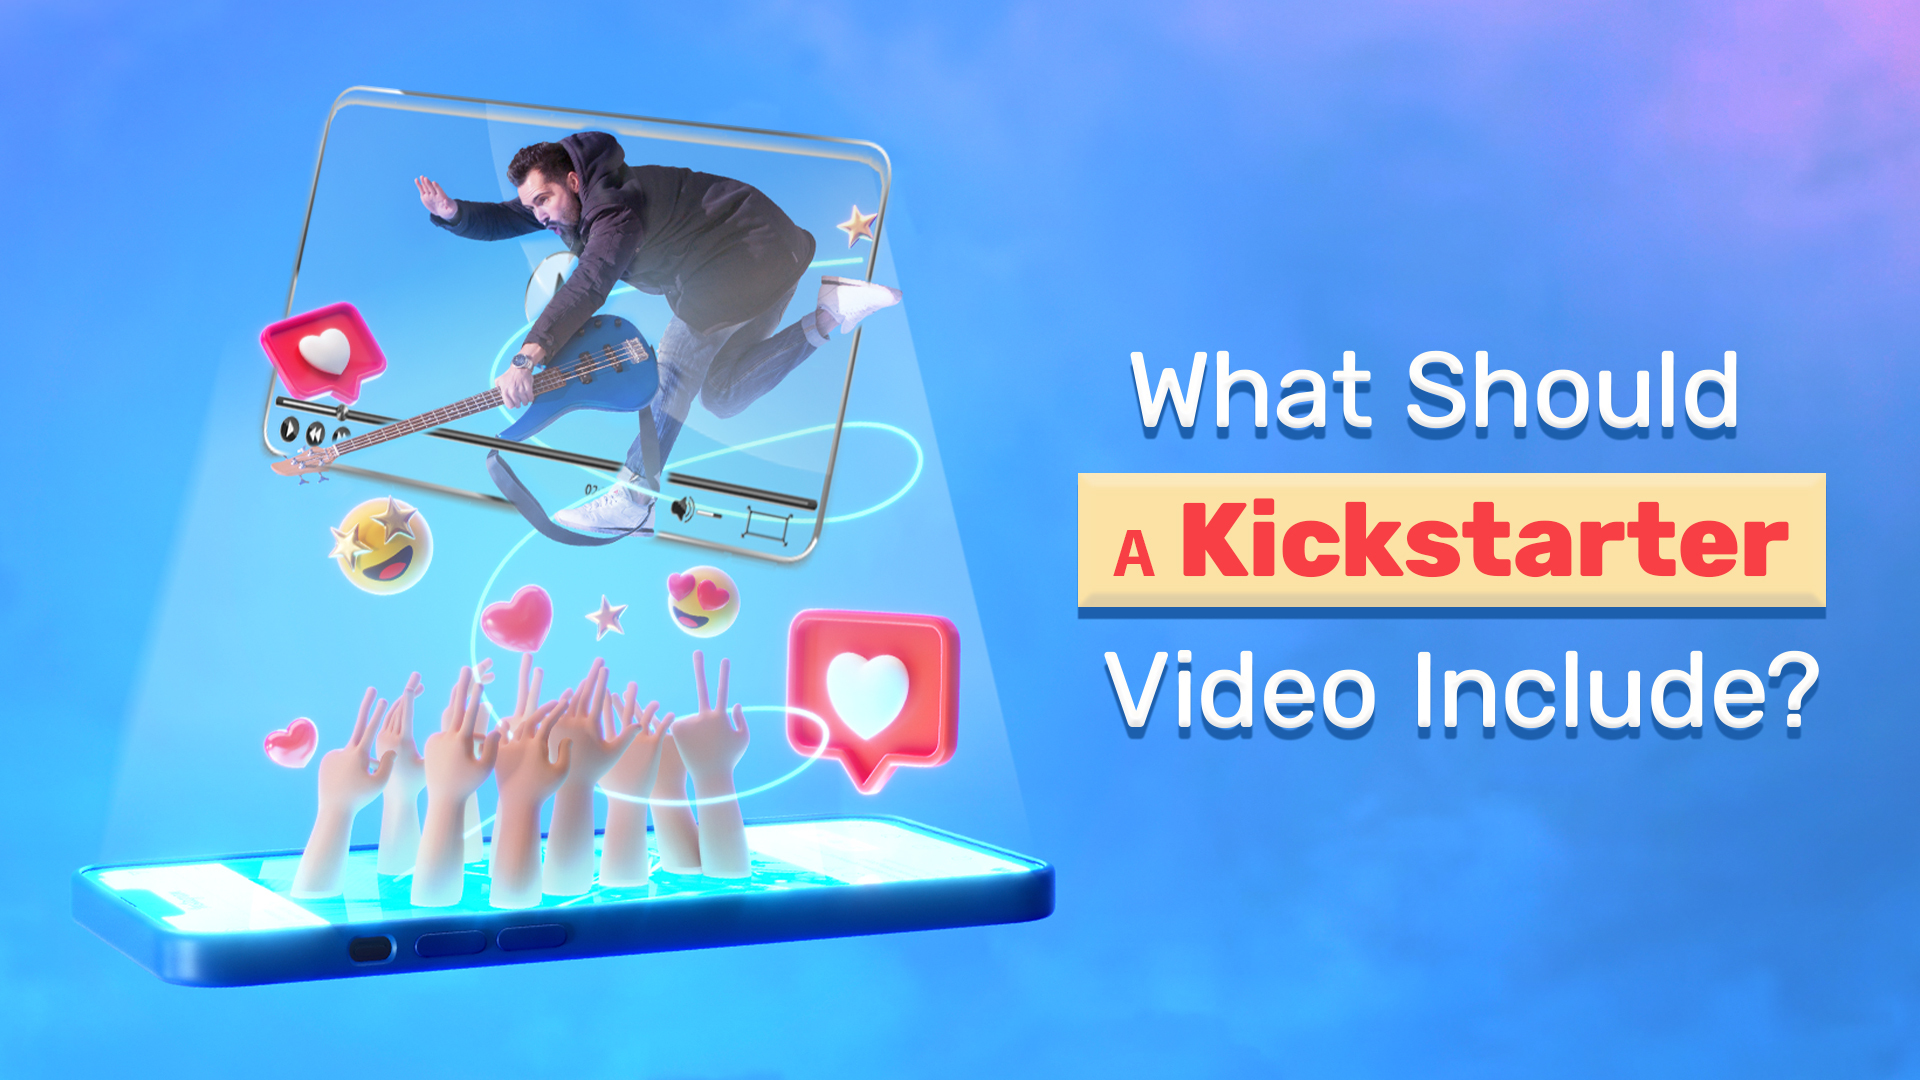 What Should A Kickstarter Video Include?